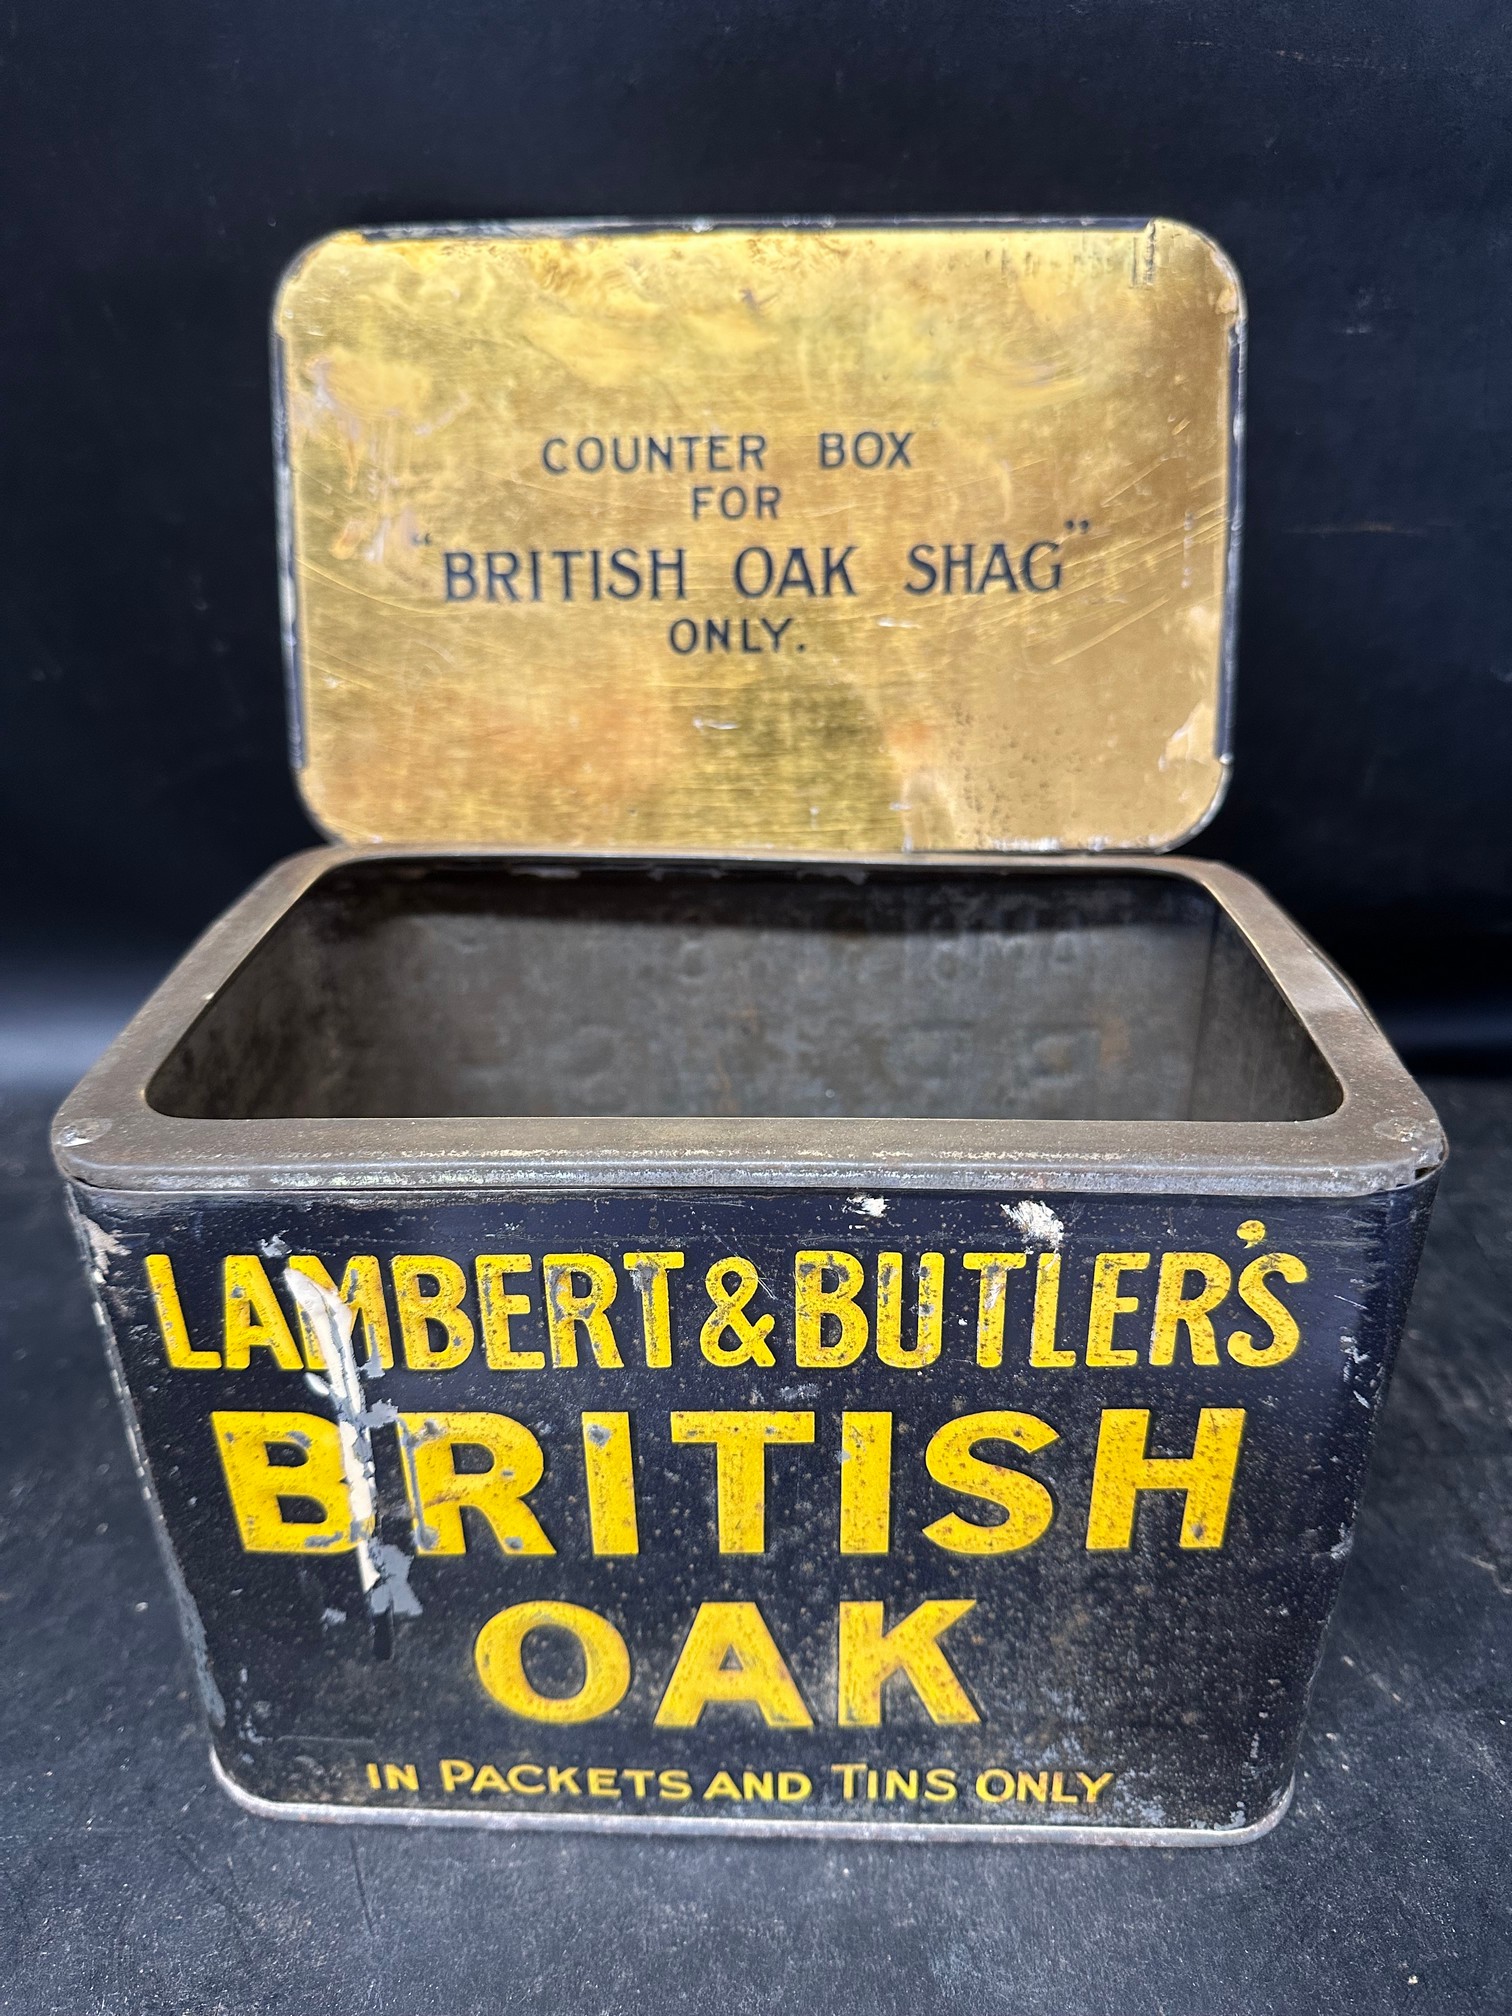 A Lambert & Butler's British Oak in packets and tins only counter box for "British Oak Shag", issued - Image 7 of 8